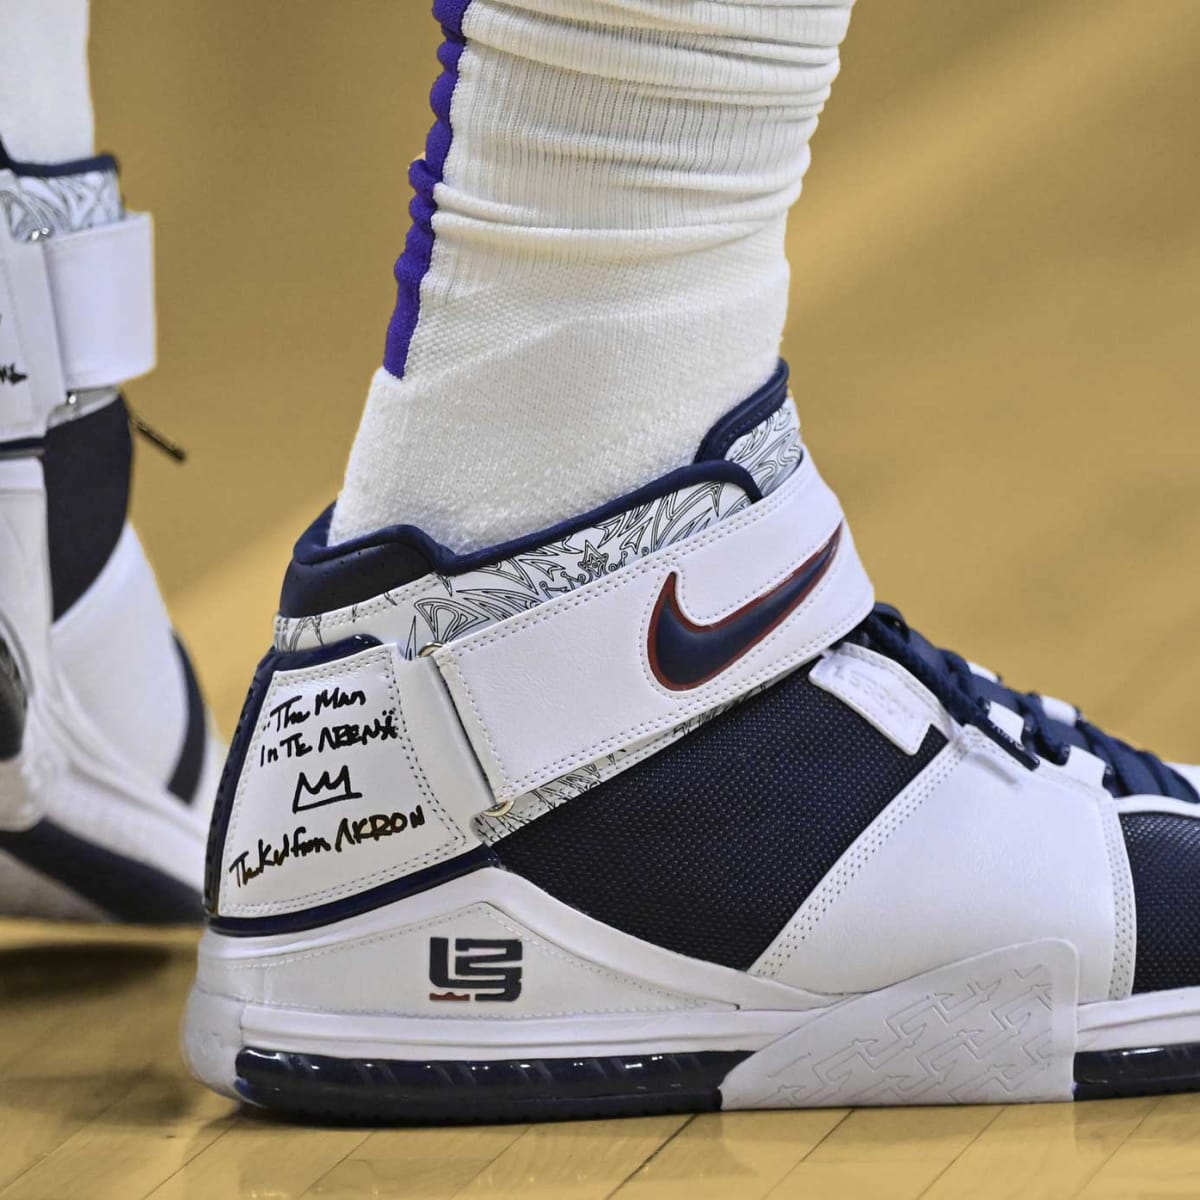 LeBron rocked LeBron 2s in Game 6 win vs. Grizzlies - Basketball Network -  Your daily dose of basketball